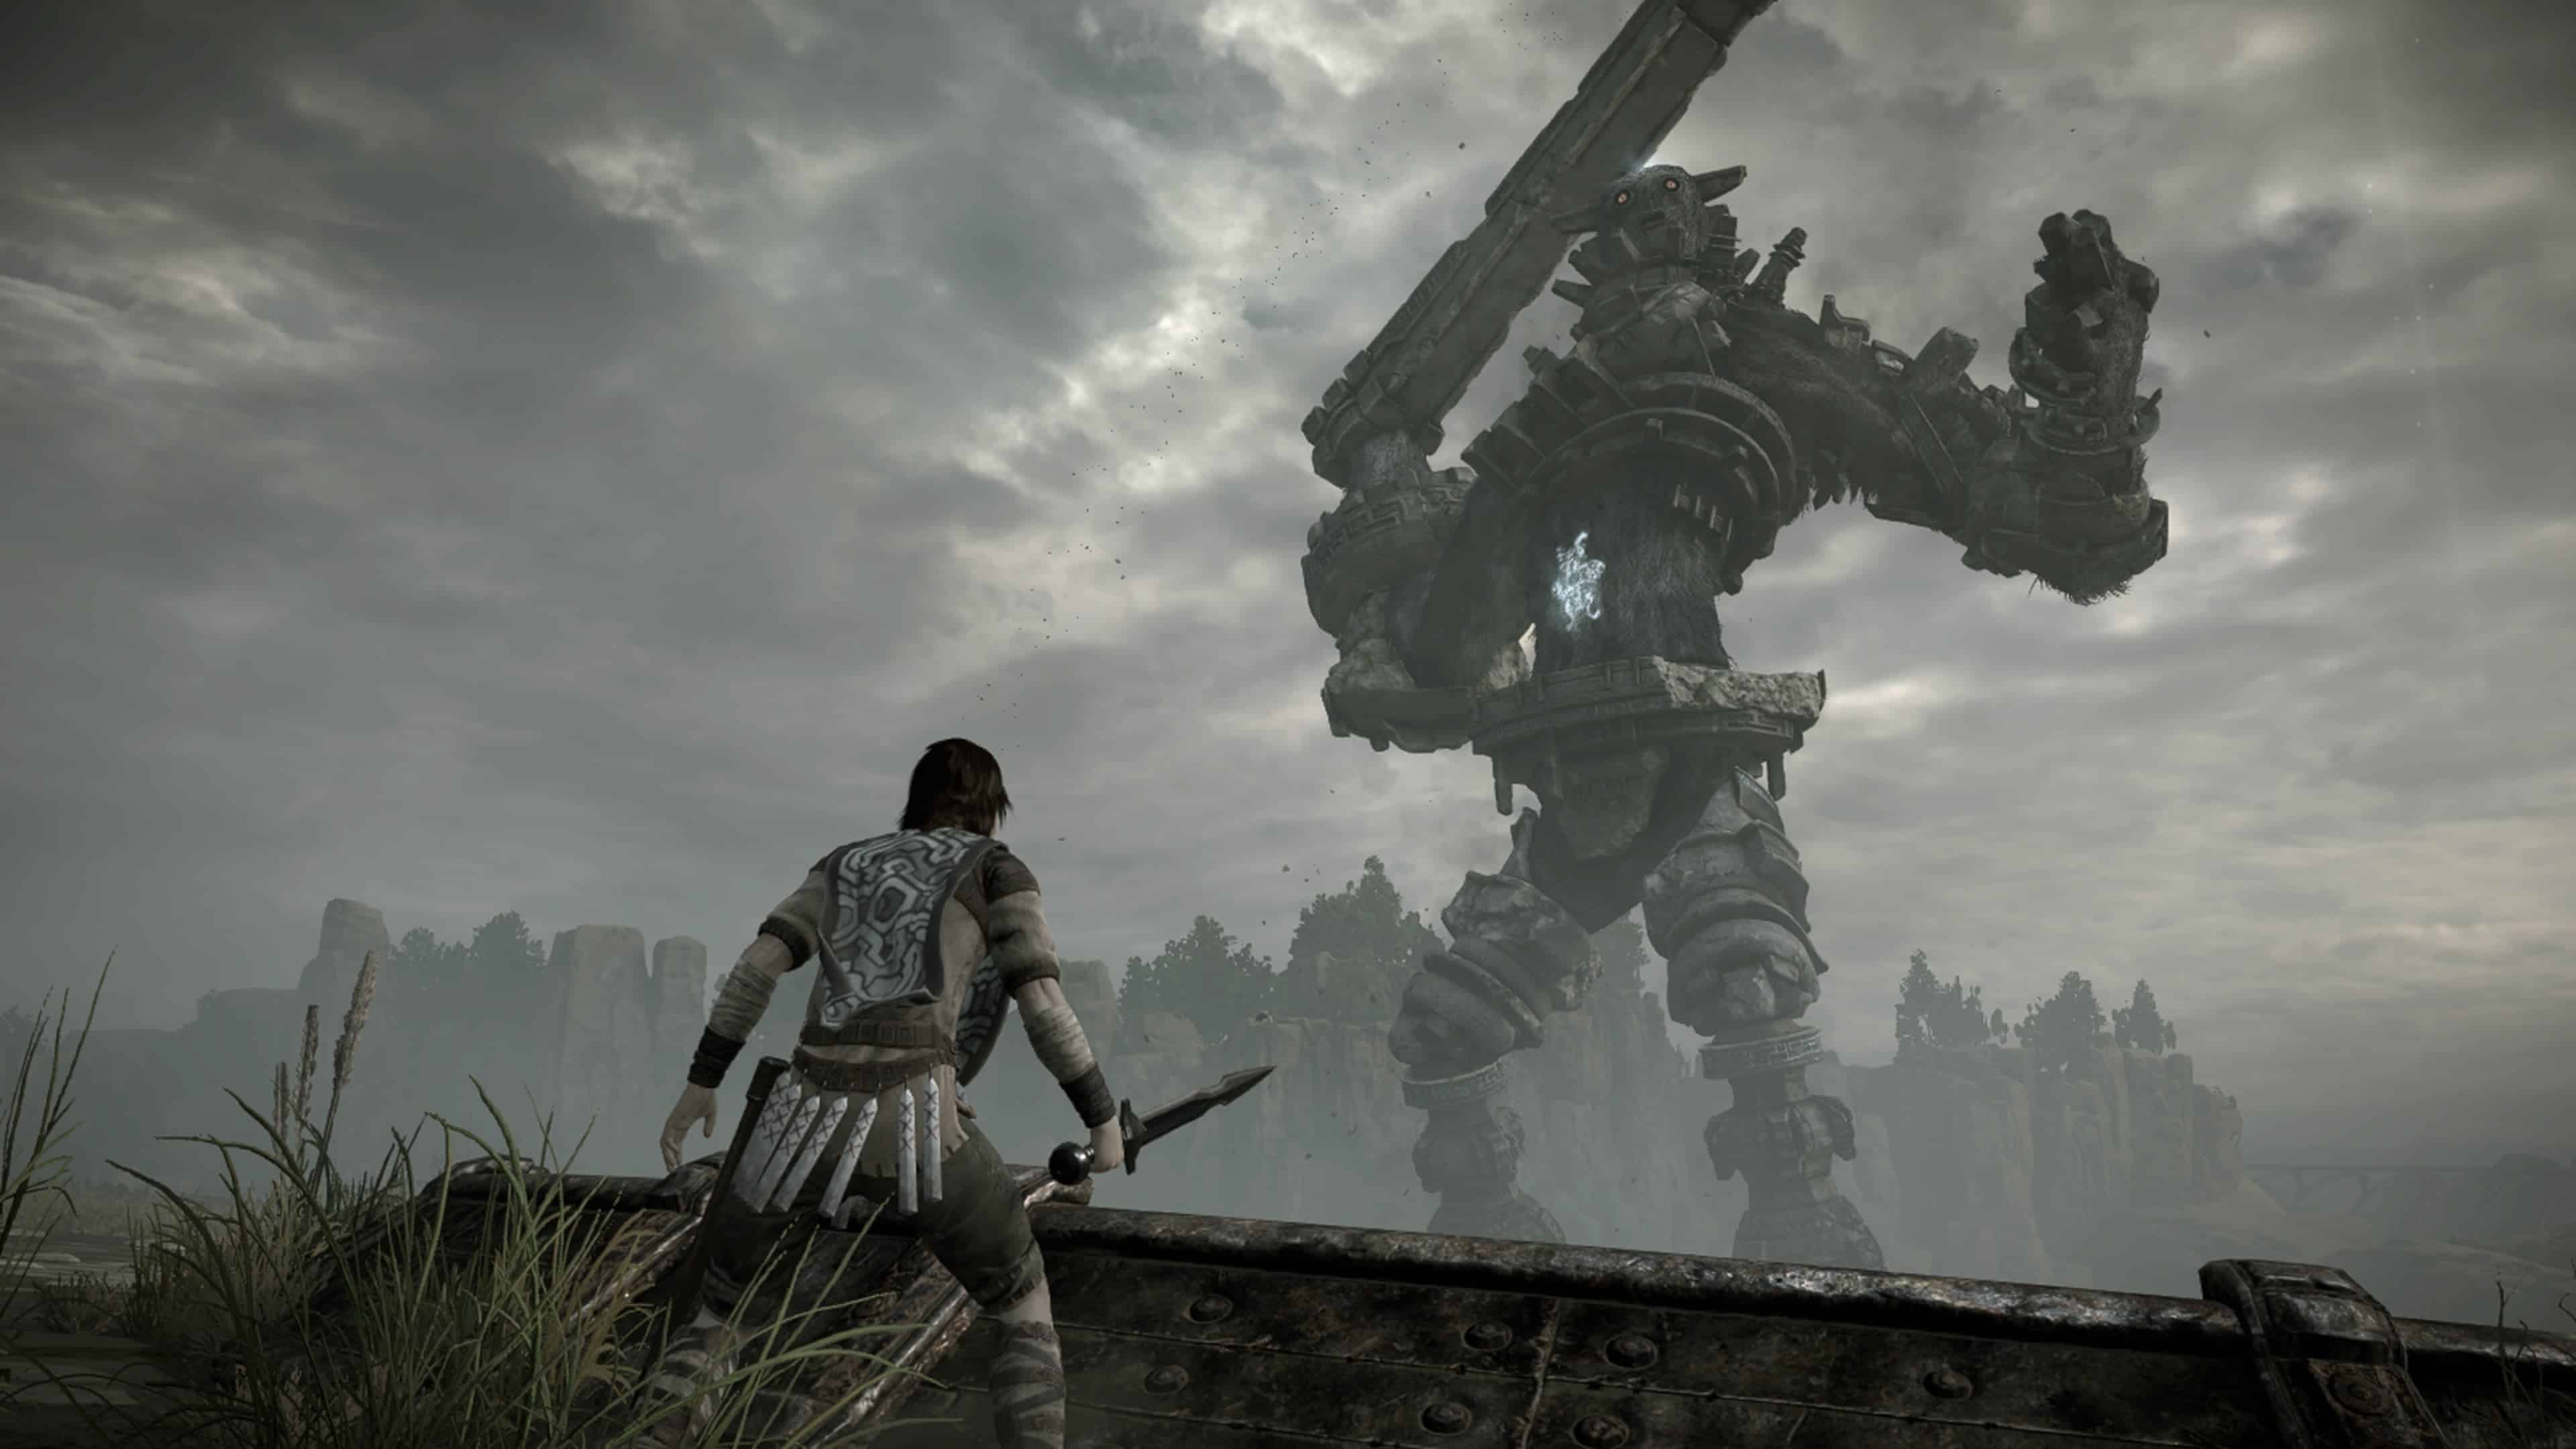 Shadow of colossus pc. Shadow of the Colossus (2018). Shadow of the Colossus на ПК. Shadow of the Colossus 2005 и 2018. Shadow of the Colossus 2018 на ПК.